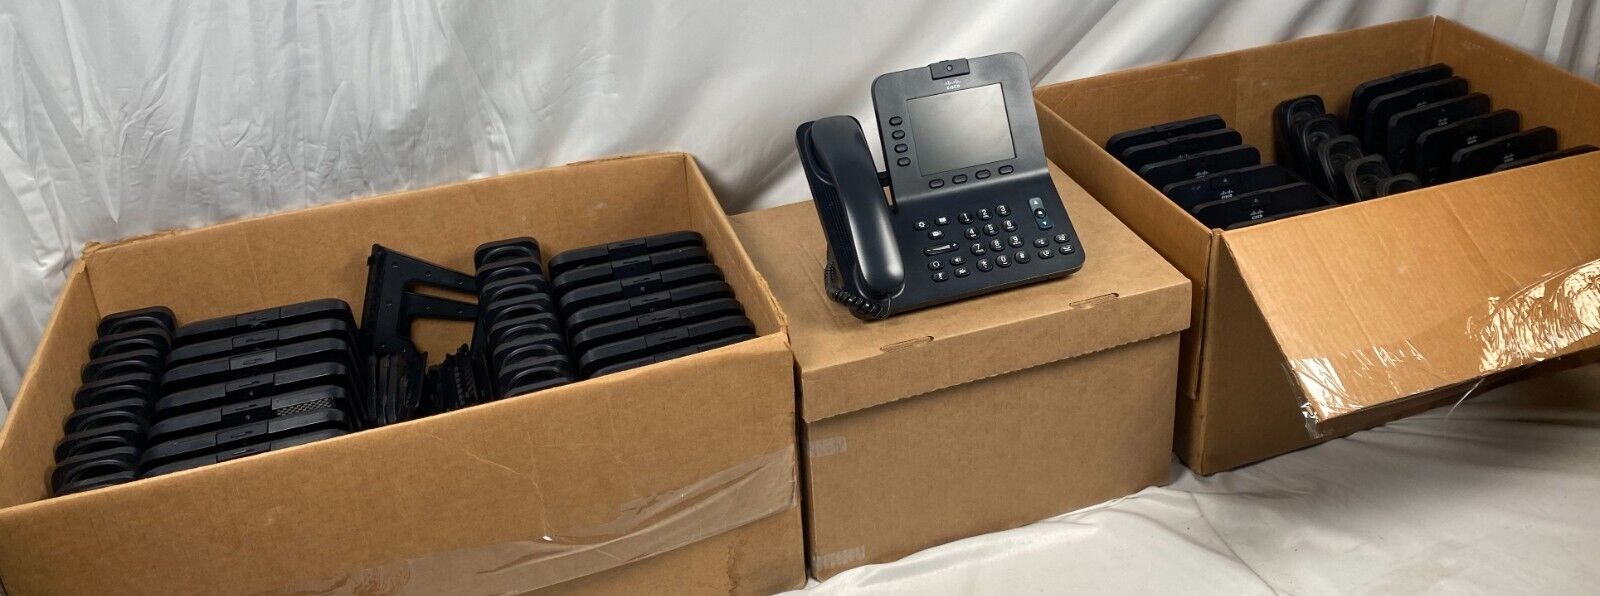 Cisco CP-8945 VoIP Color Display Corded Video Phones w/ Webcams - LOT of 31